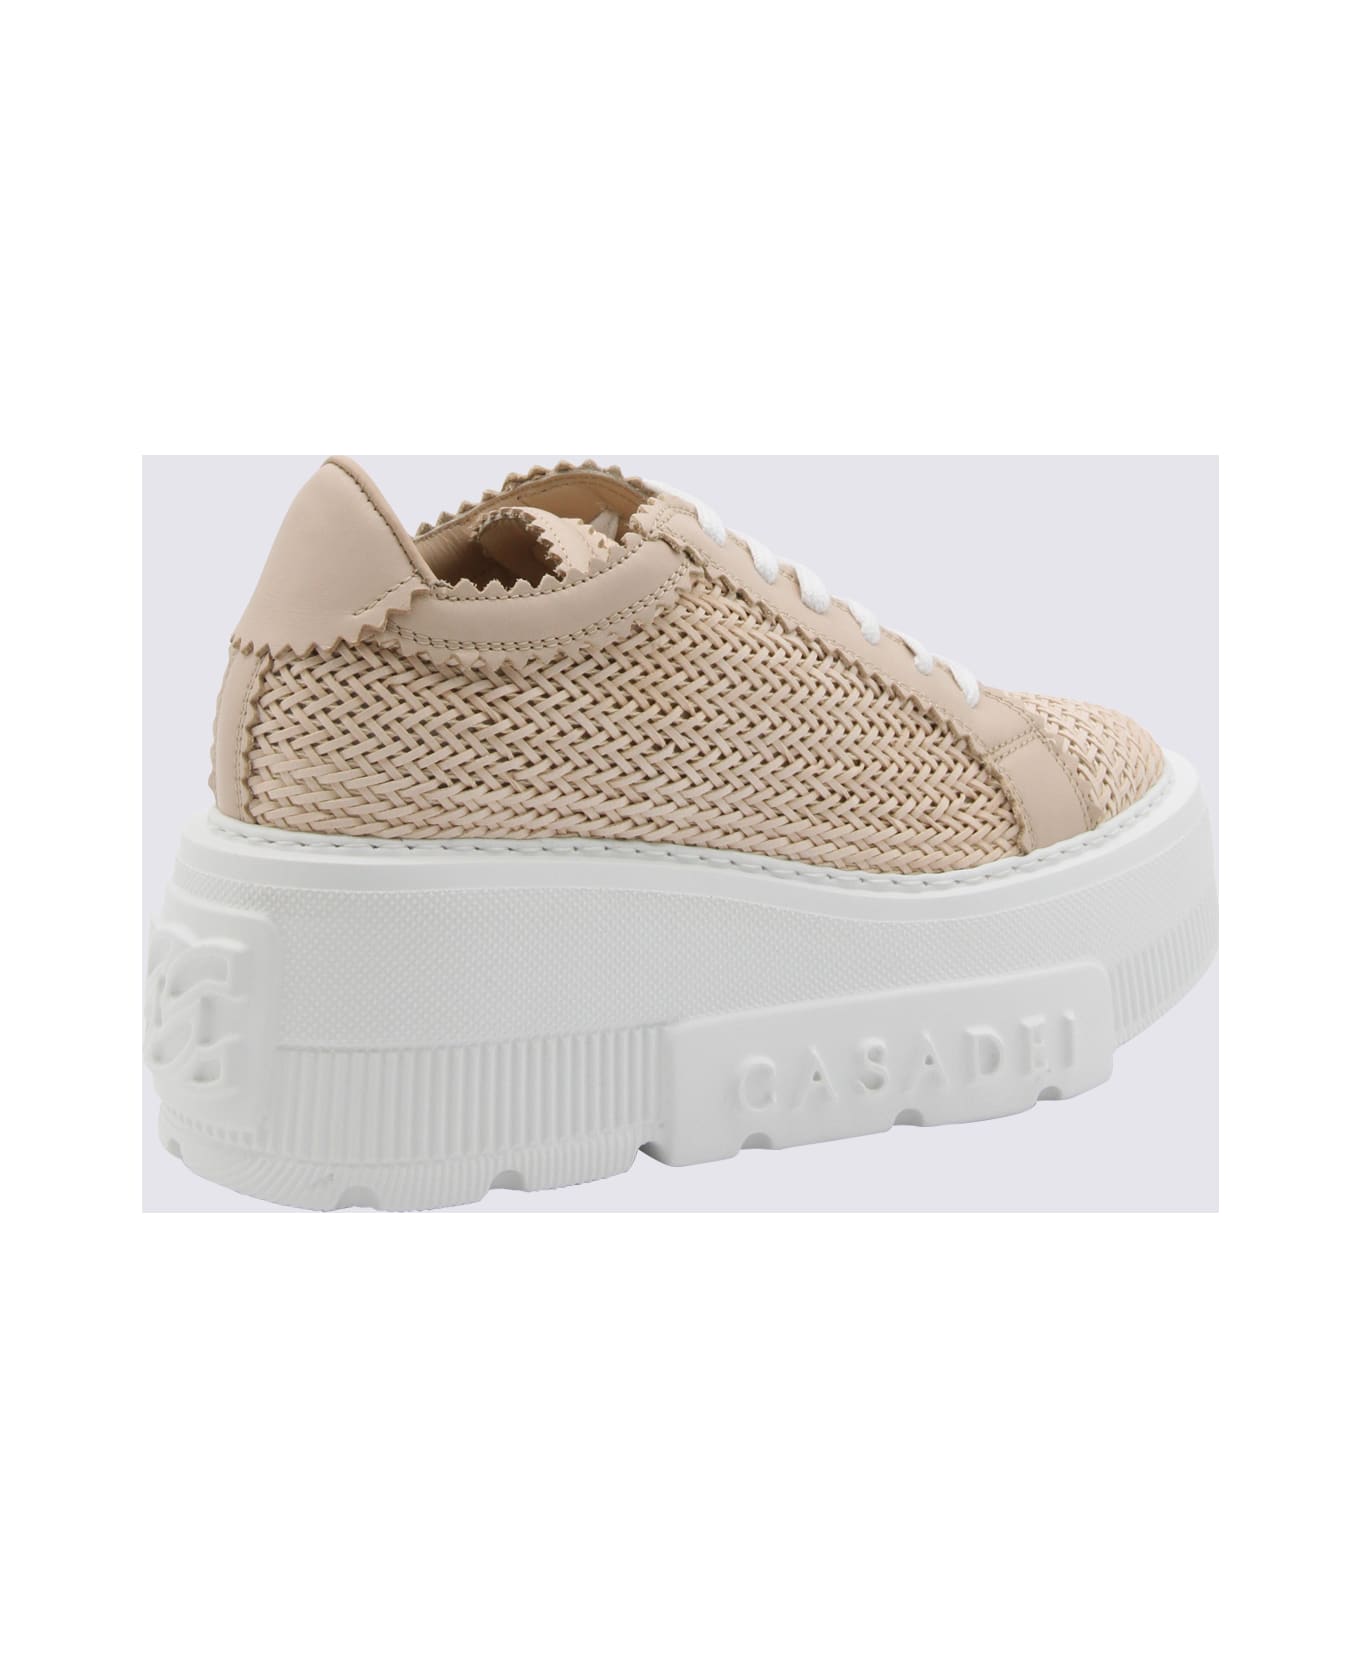 Casadei Light Pink And White Leather Sneakers - SPIAGGIA ROSA